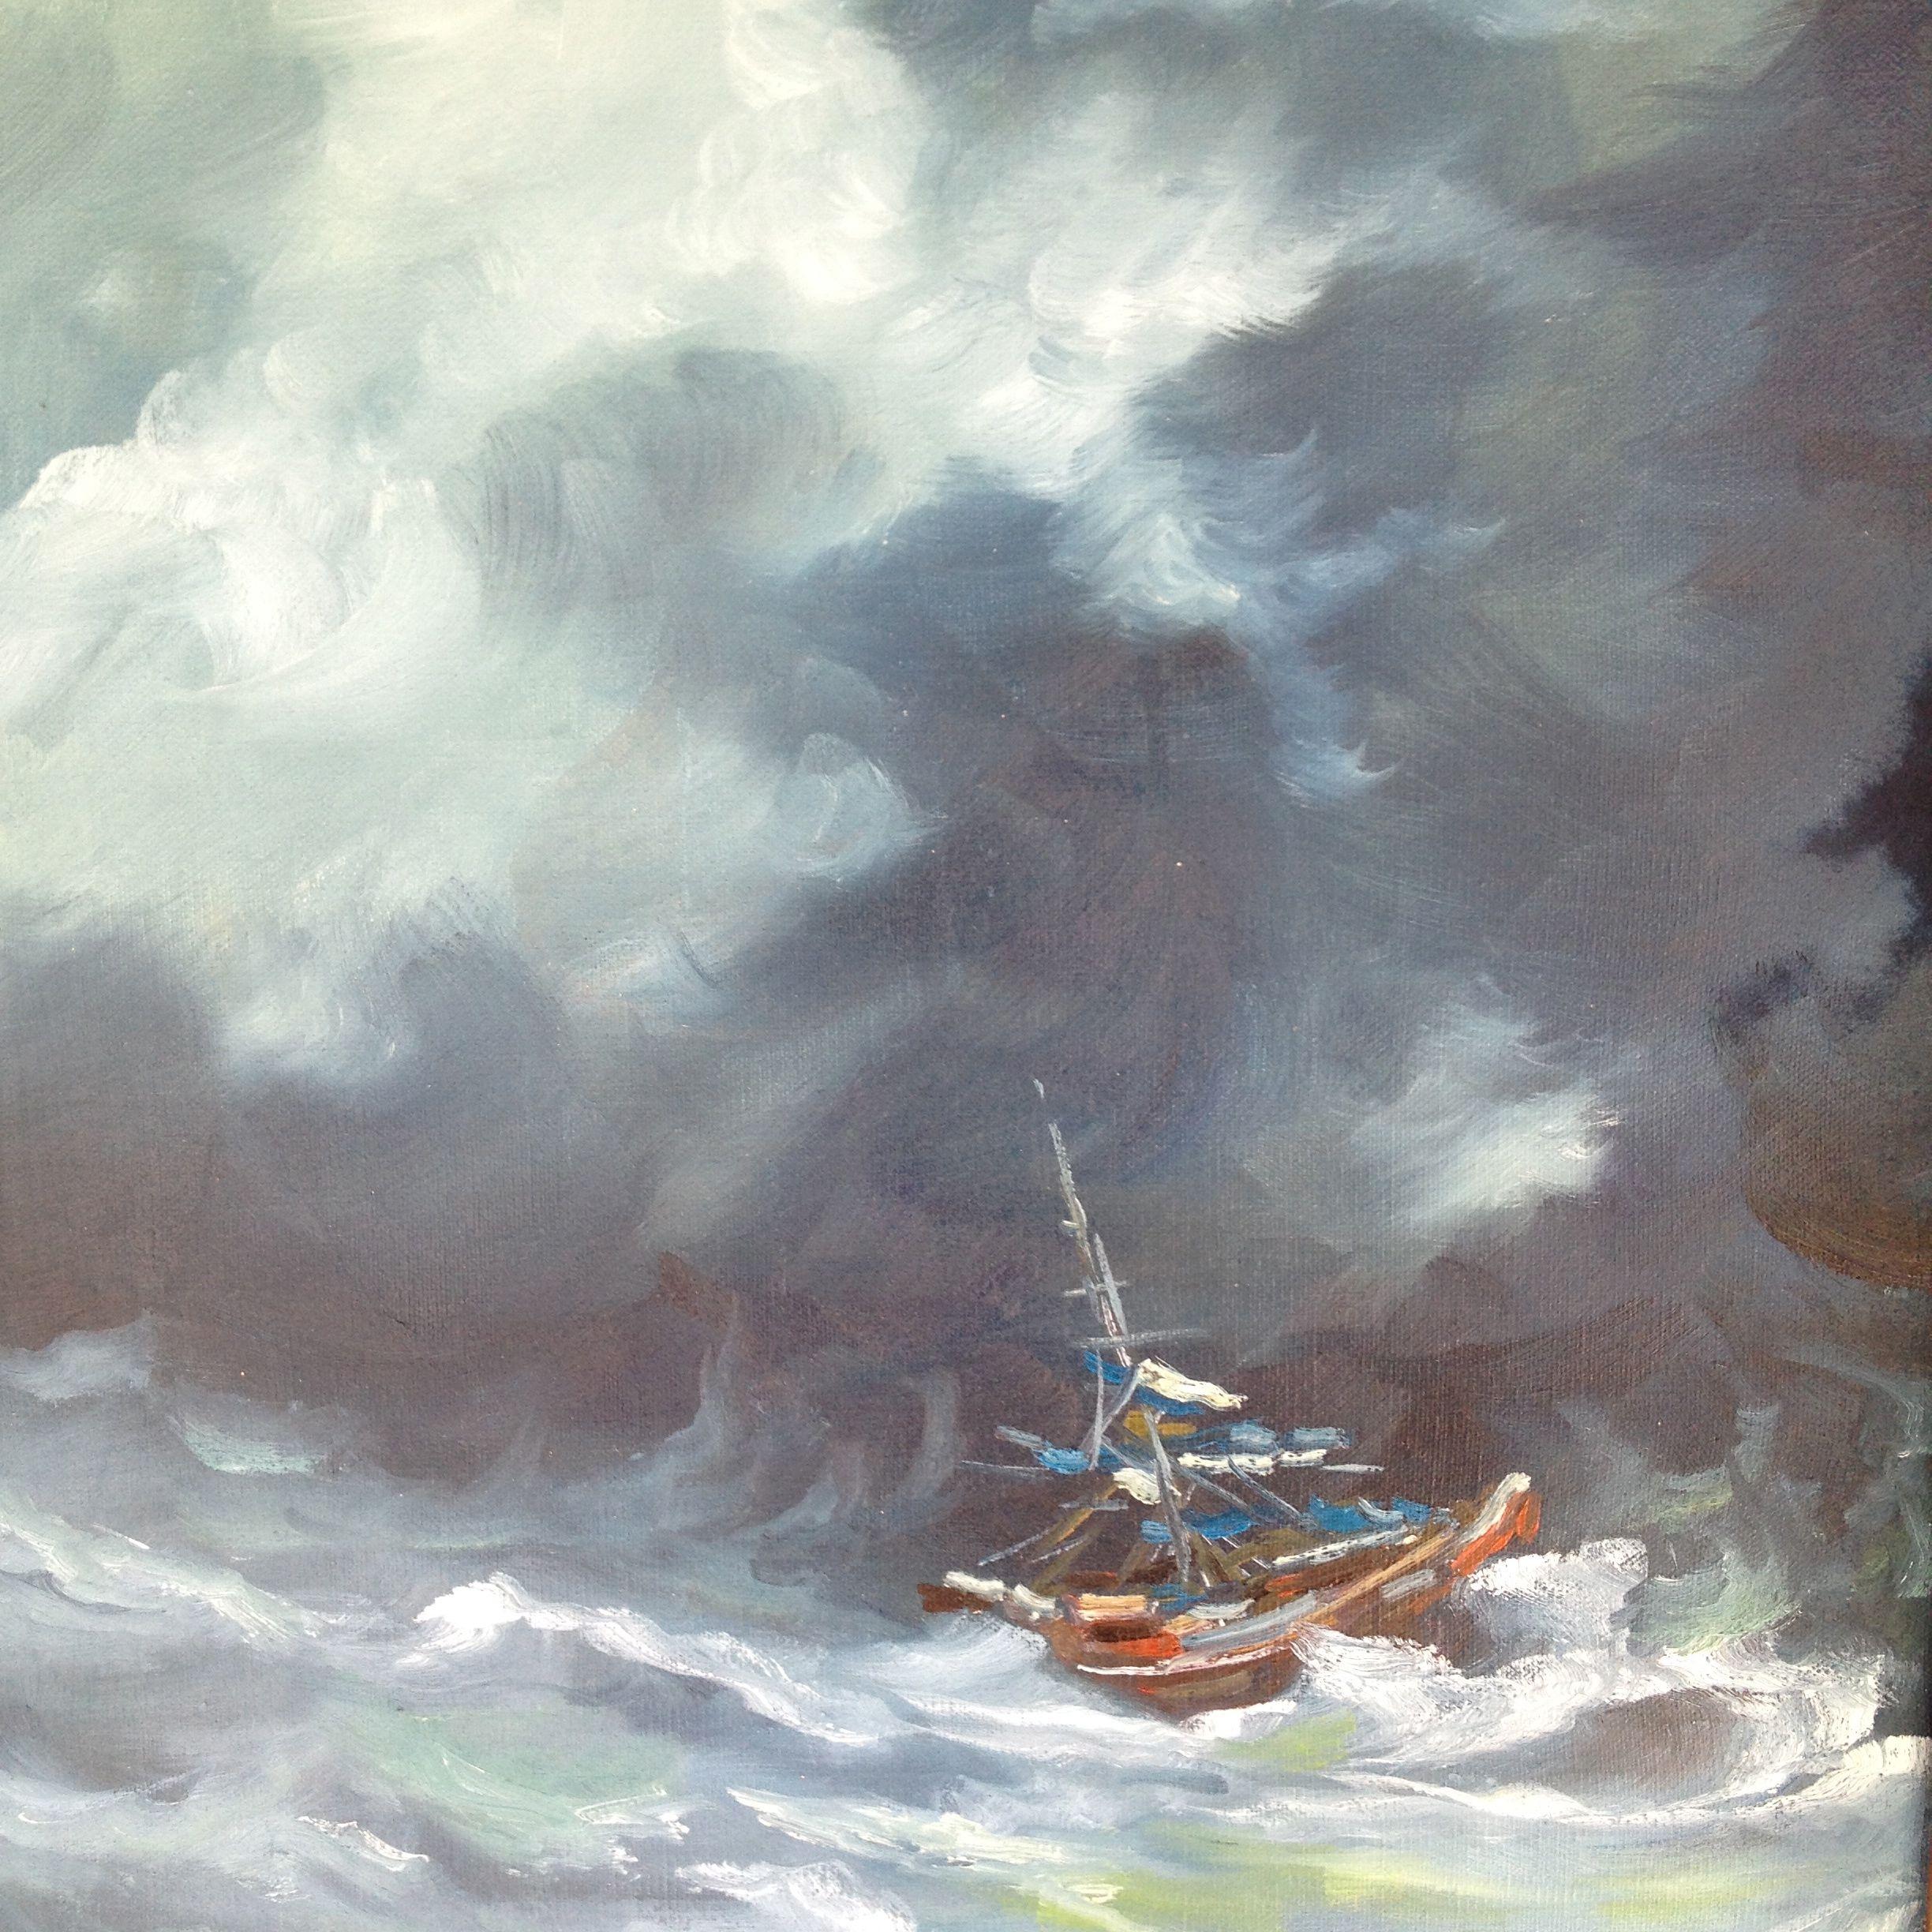 famous painting of ship in storm